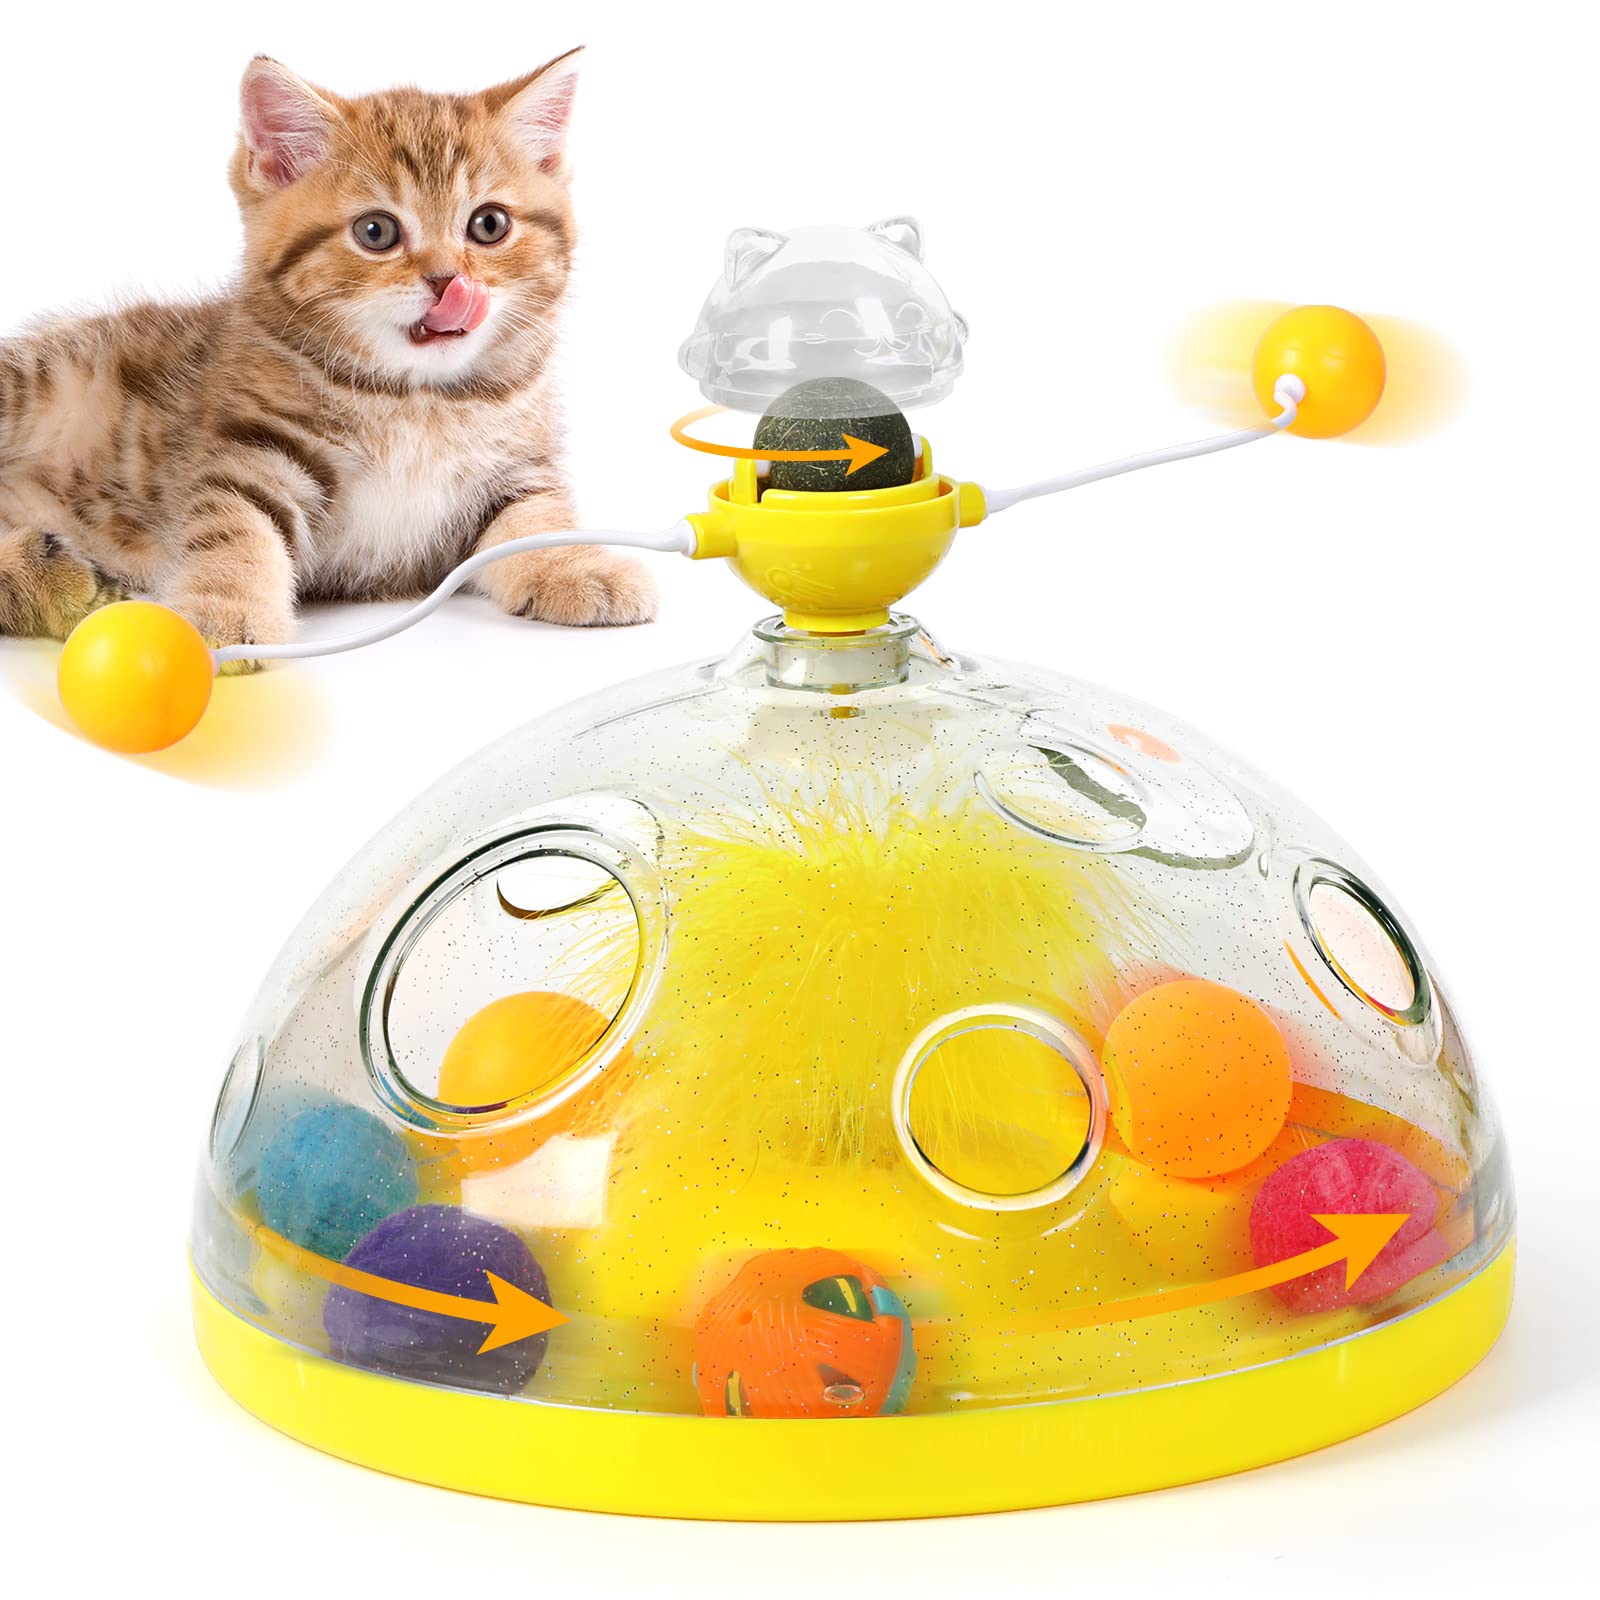 Kelutd Cat Toys, Interactive Cat Feeder Toy, Pet Exercise Toys, Cat Toys  for Indoor Cats/Kitten as Cat Gifts, Patented Product